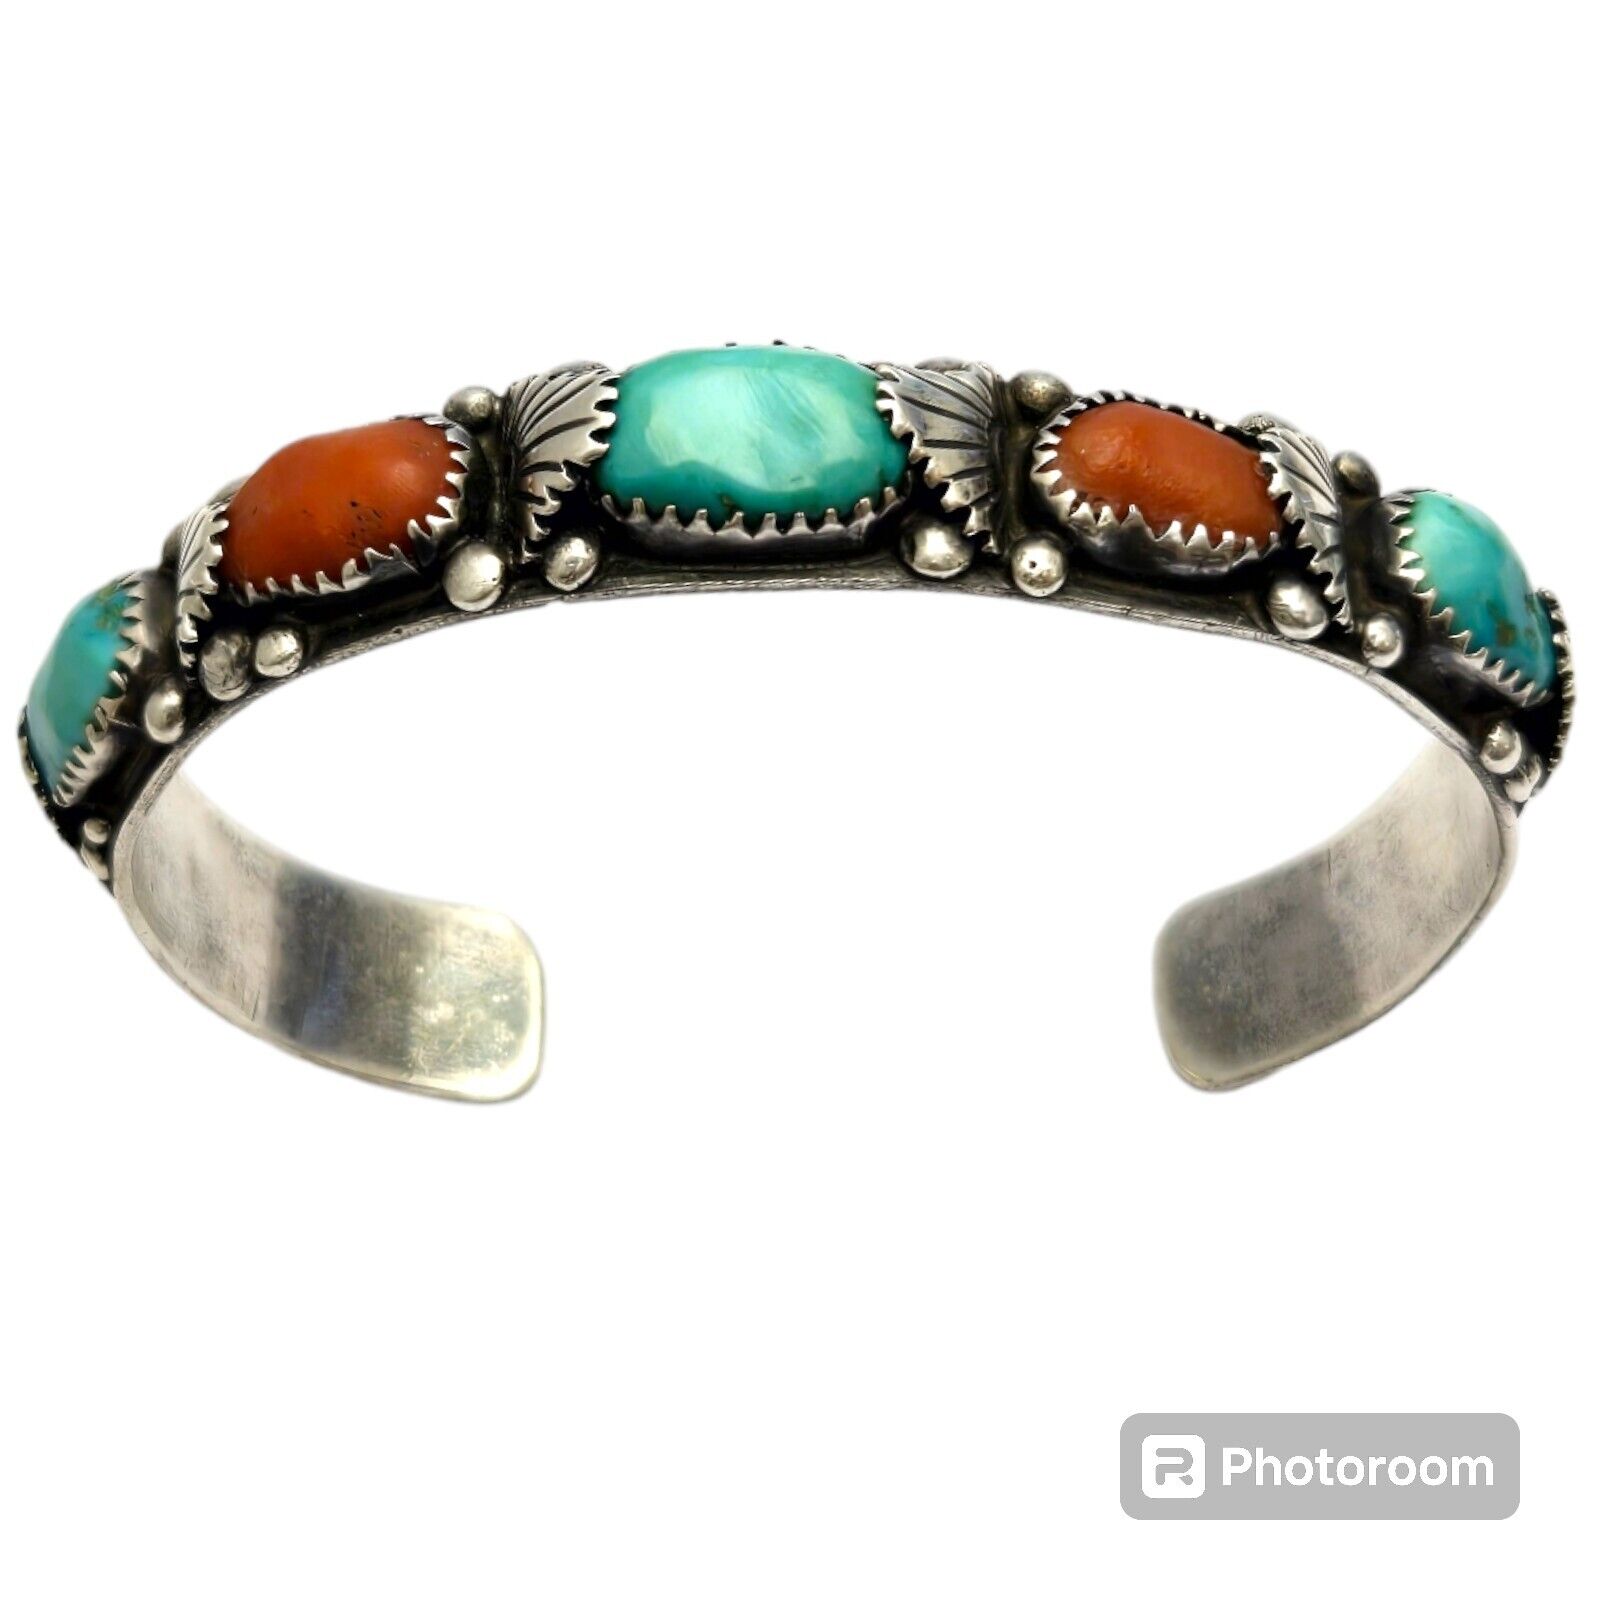 Superb Zuni Sterling Silver Coral and Turquoise Bracelet by Dave & Celia Nieto 